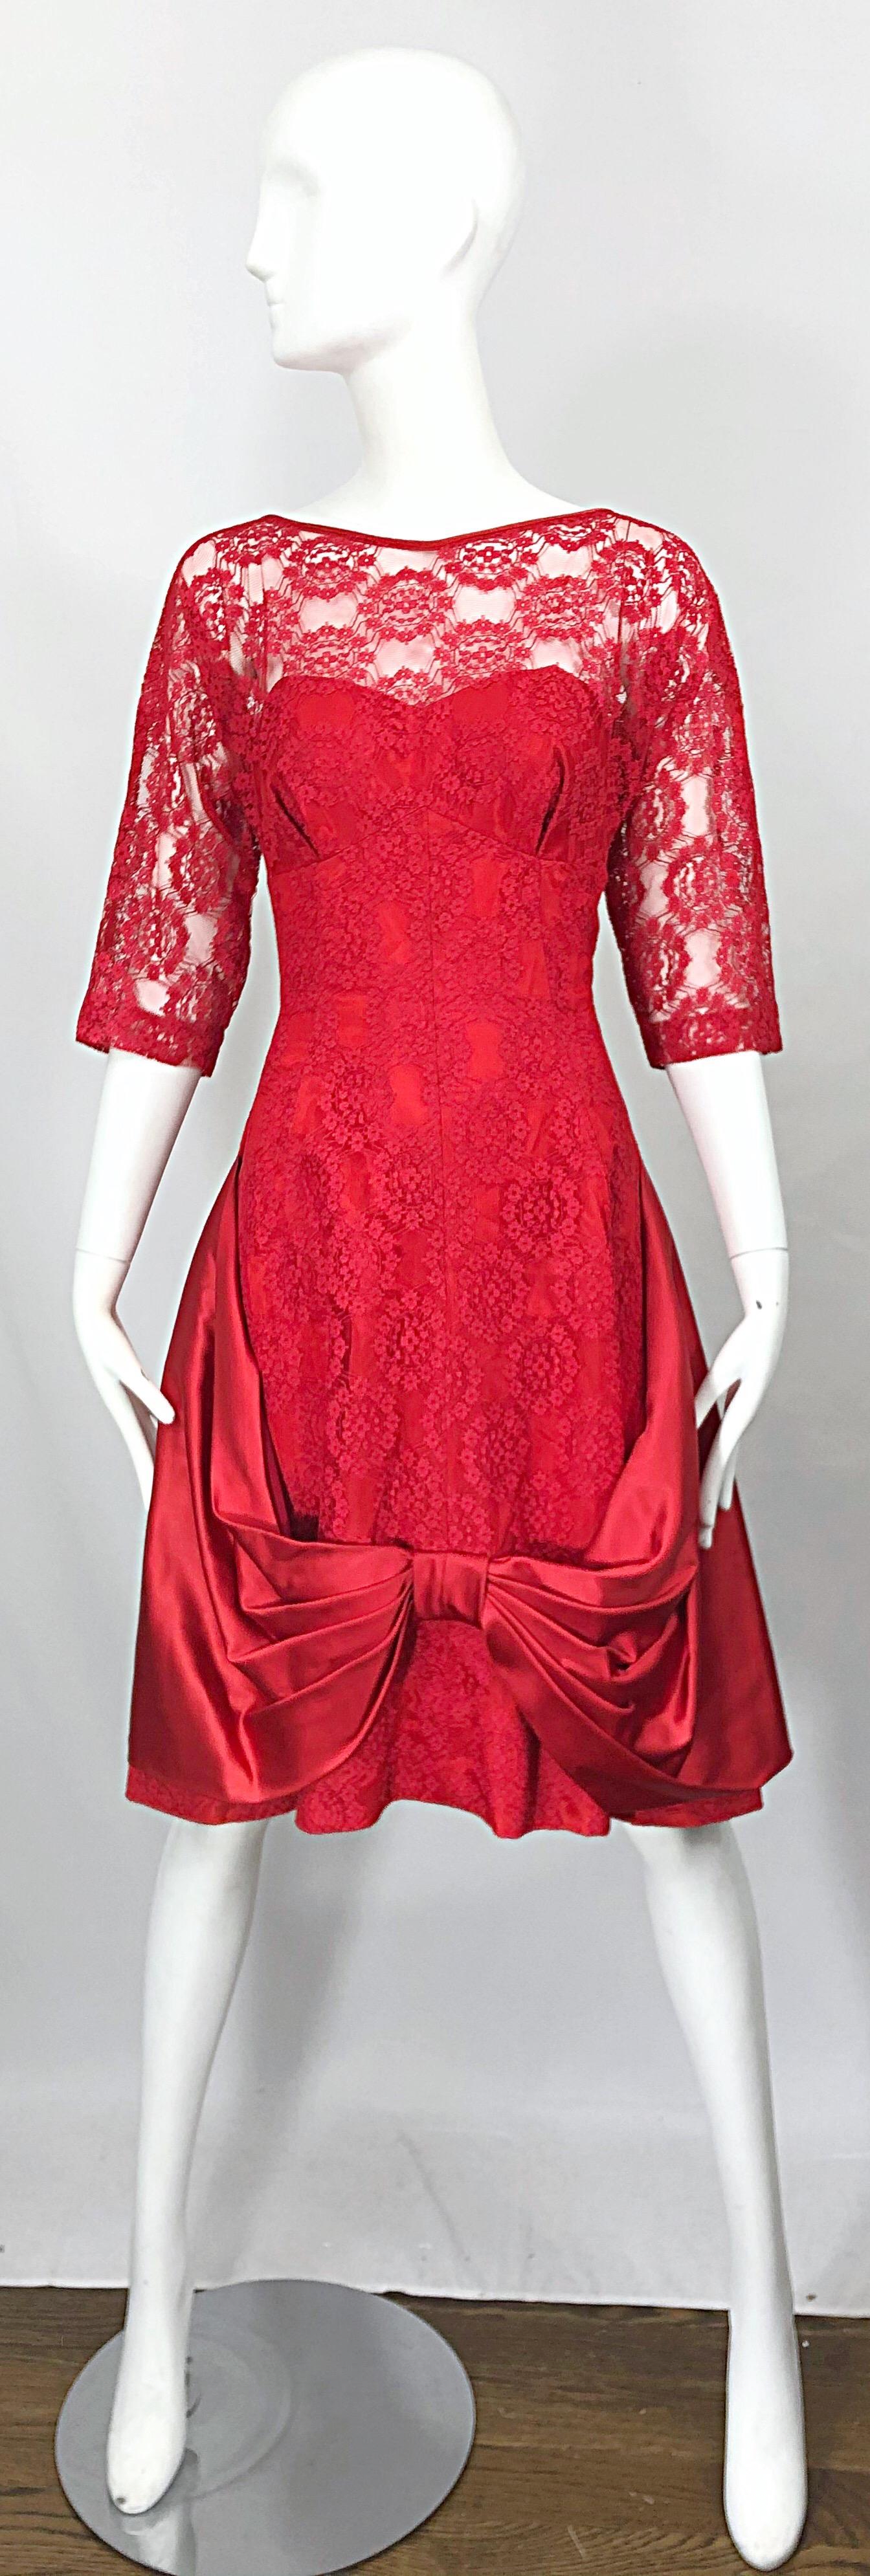 Incredible 1950s demi couture lipstick red silk lace fit n' flare cocktail dress! Features silk taffeta with red lace overlay. Large satin bow detail at center front hem. Fitted tailored bodice with a forgiving full skirt. Hidden metal zipper up the